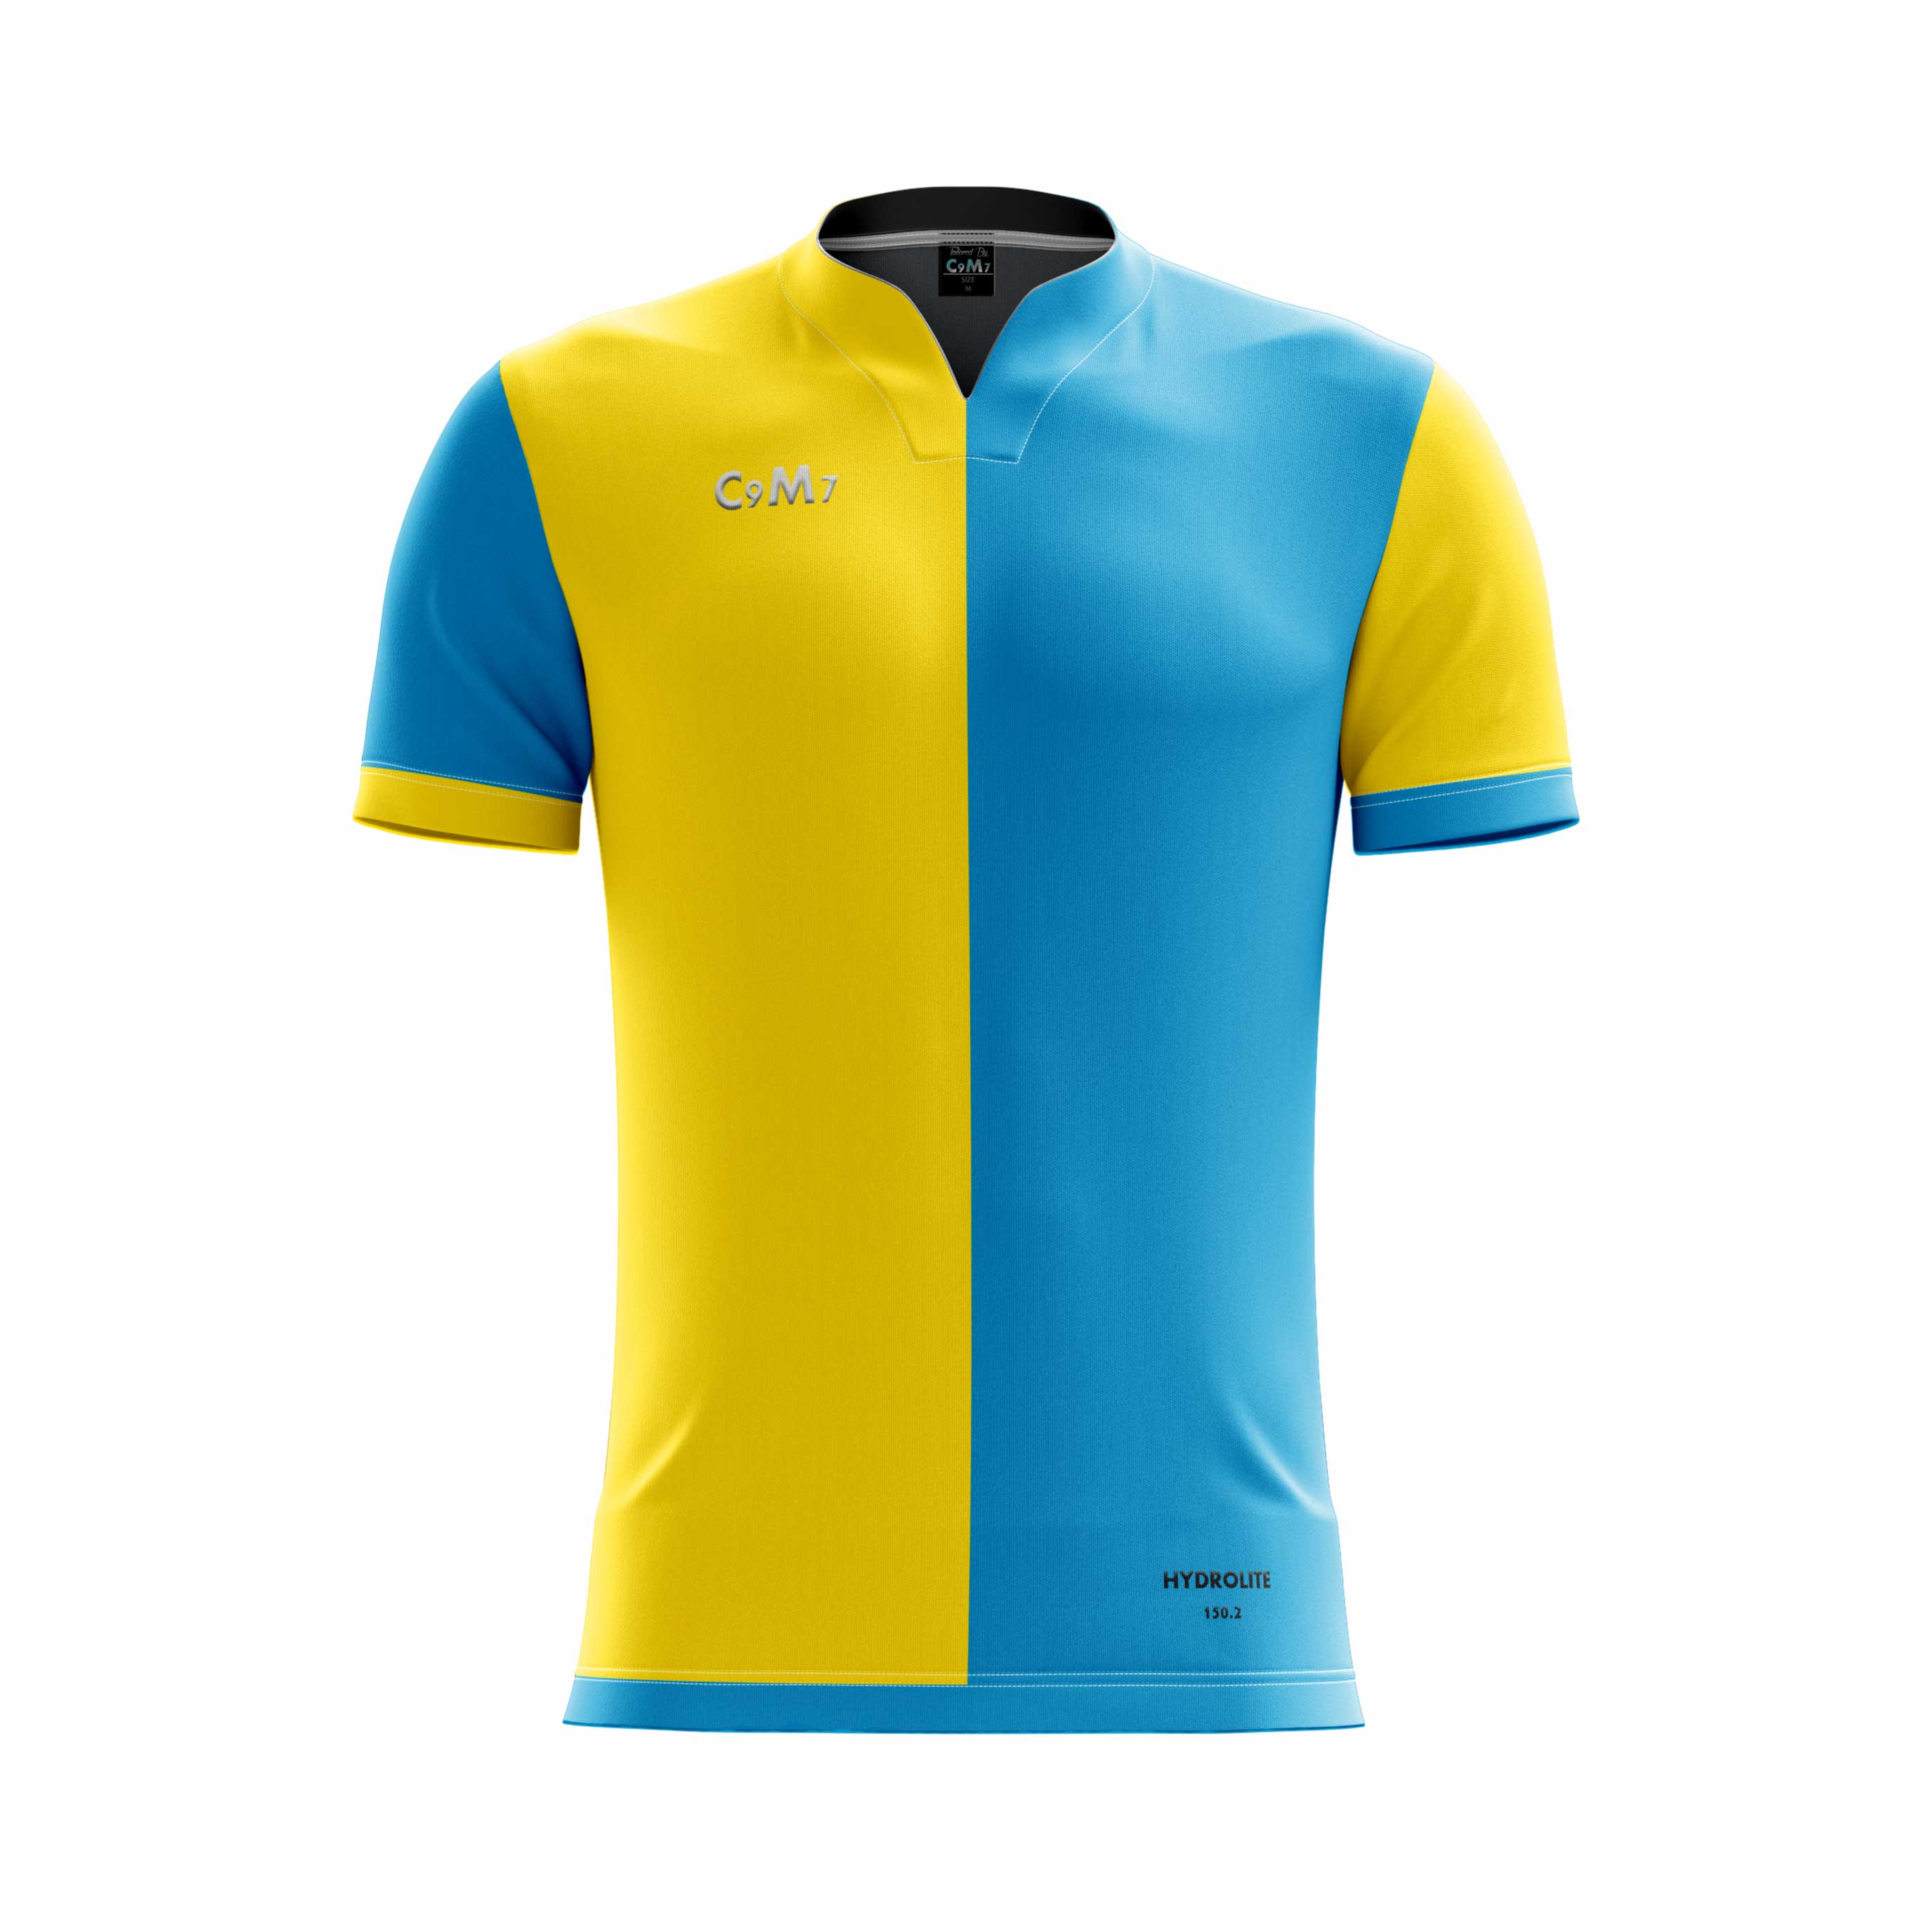 blue and yellow football jersey